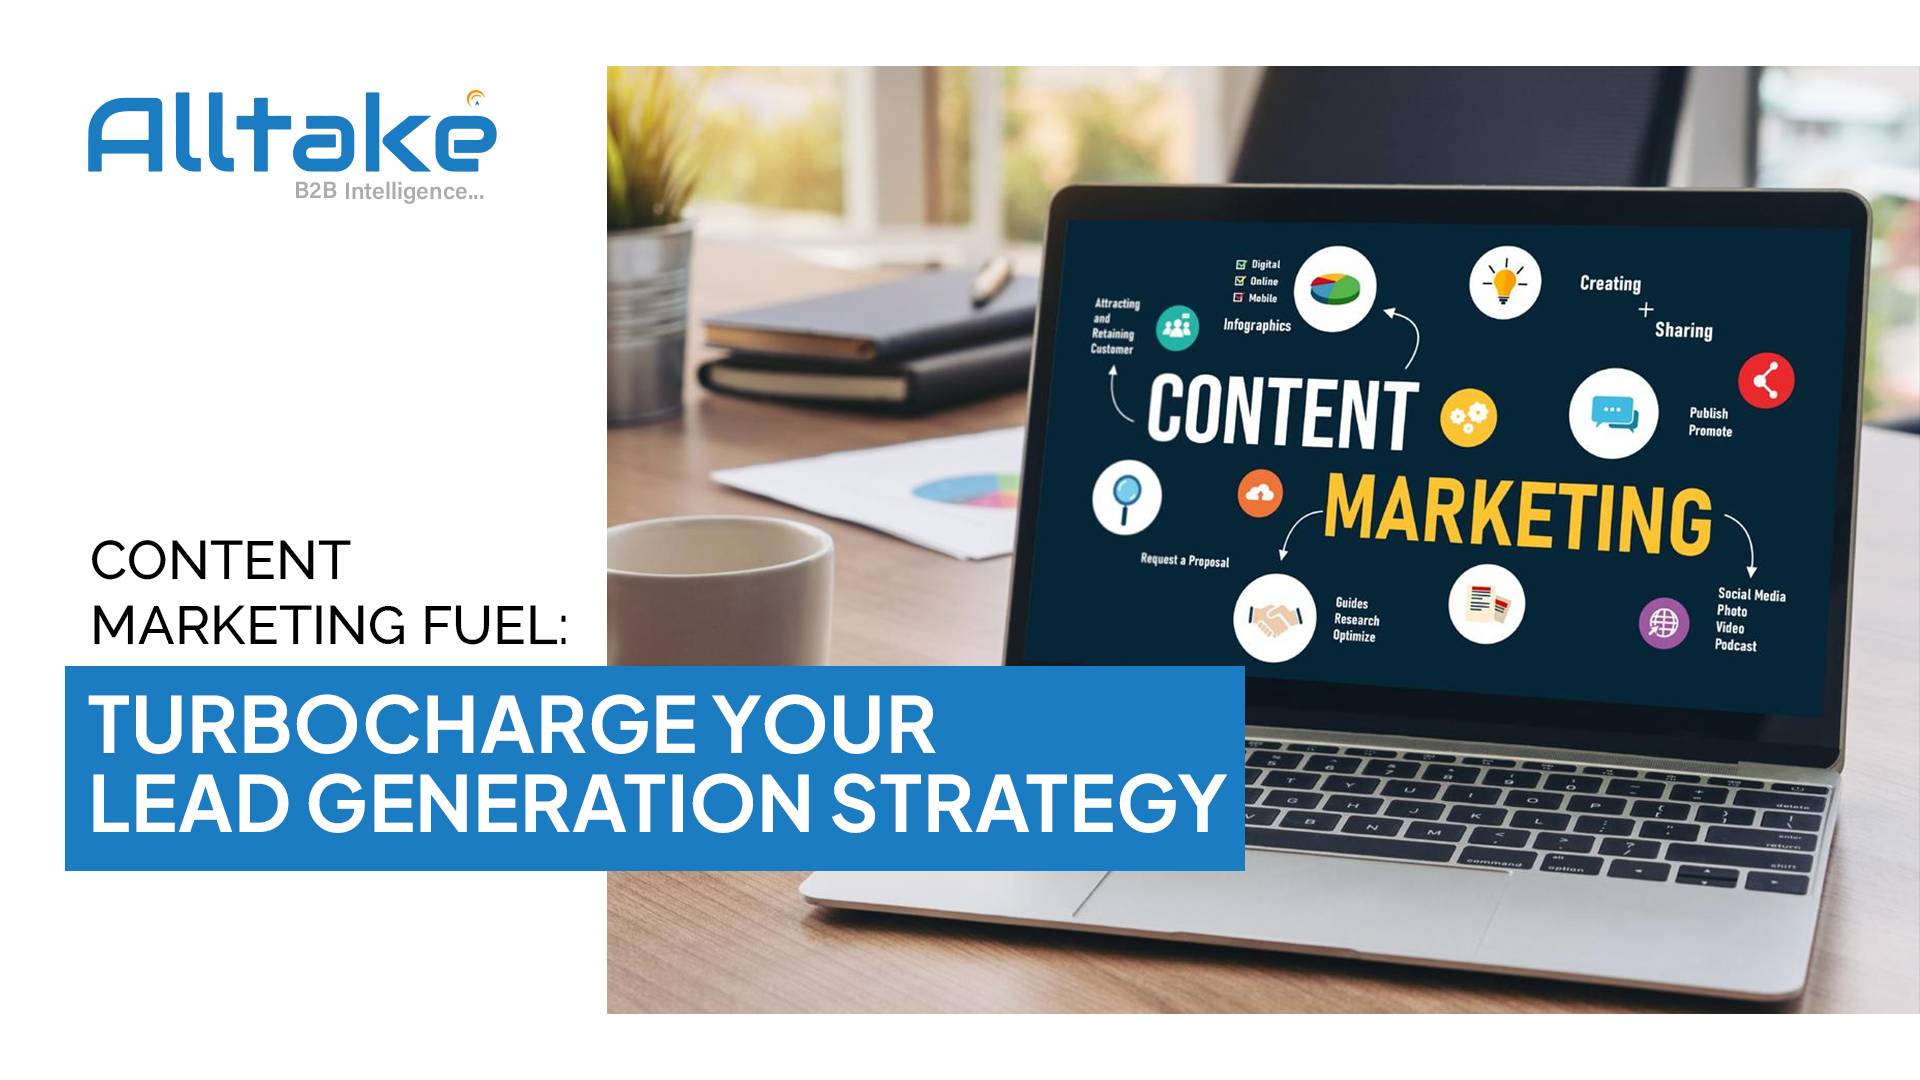 Content Marketing Fuel: Turbocharge Your Lead Generation Strategy